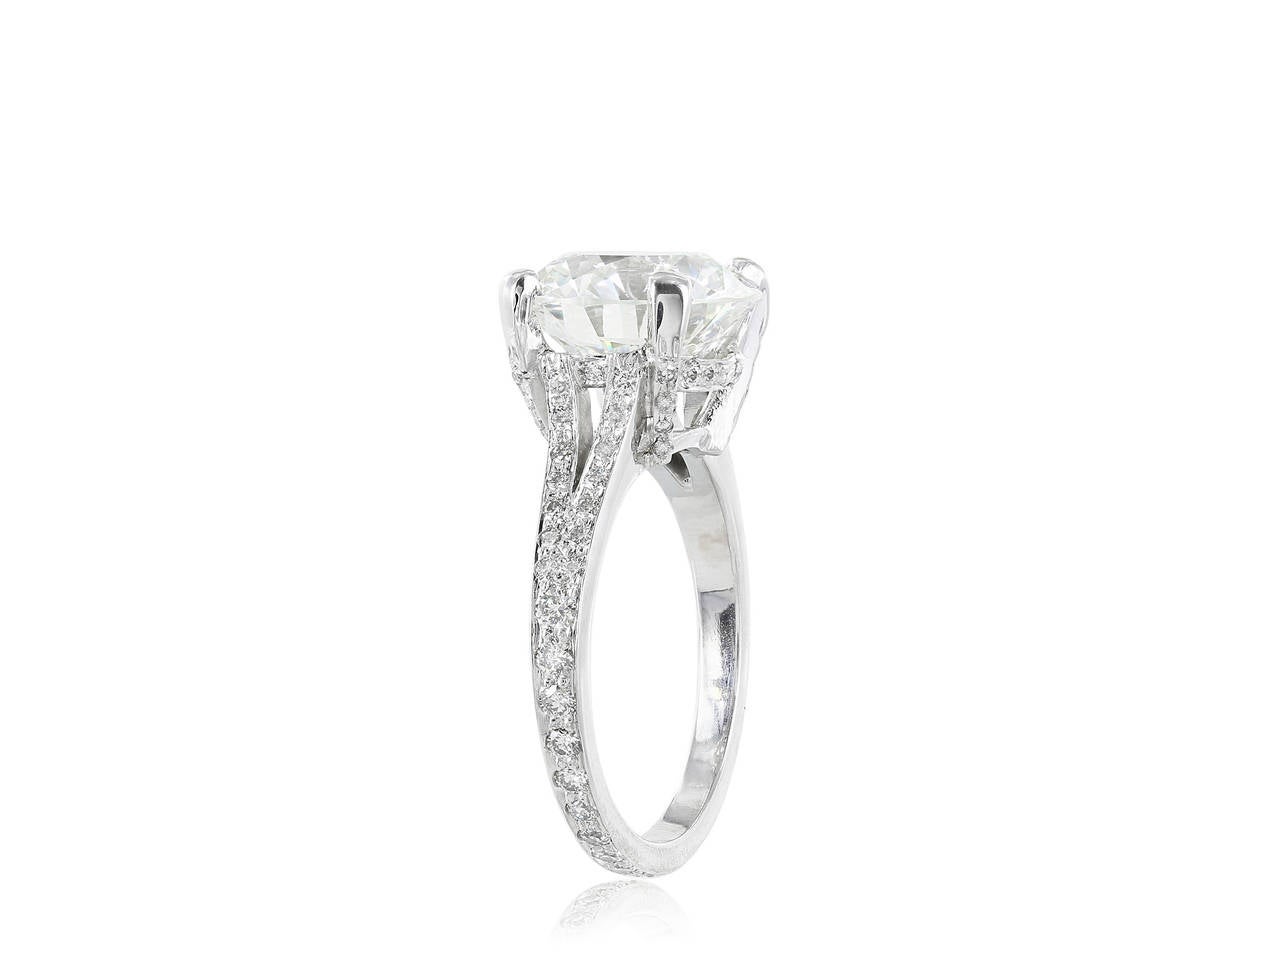 Platinum custom made solitaire ring consisting of one round brilliant cut diamond weighing 5.06 carats, measuring 11.12 - 11.19 x 6.76 mm, having a color and clarity of J/SI1 respectively, triple excellent grades for cut, polish and symmetry with